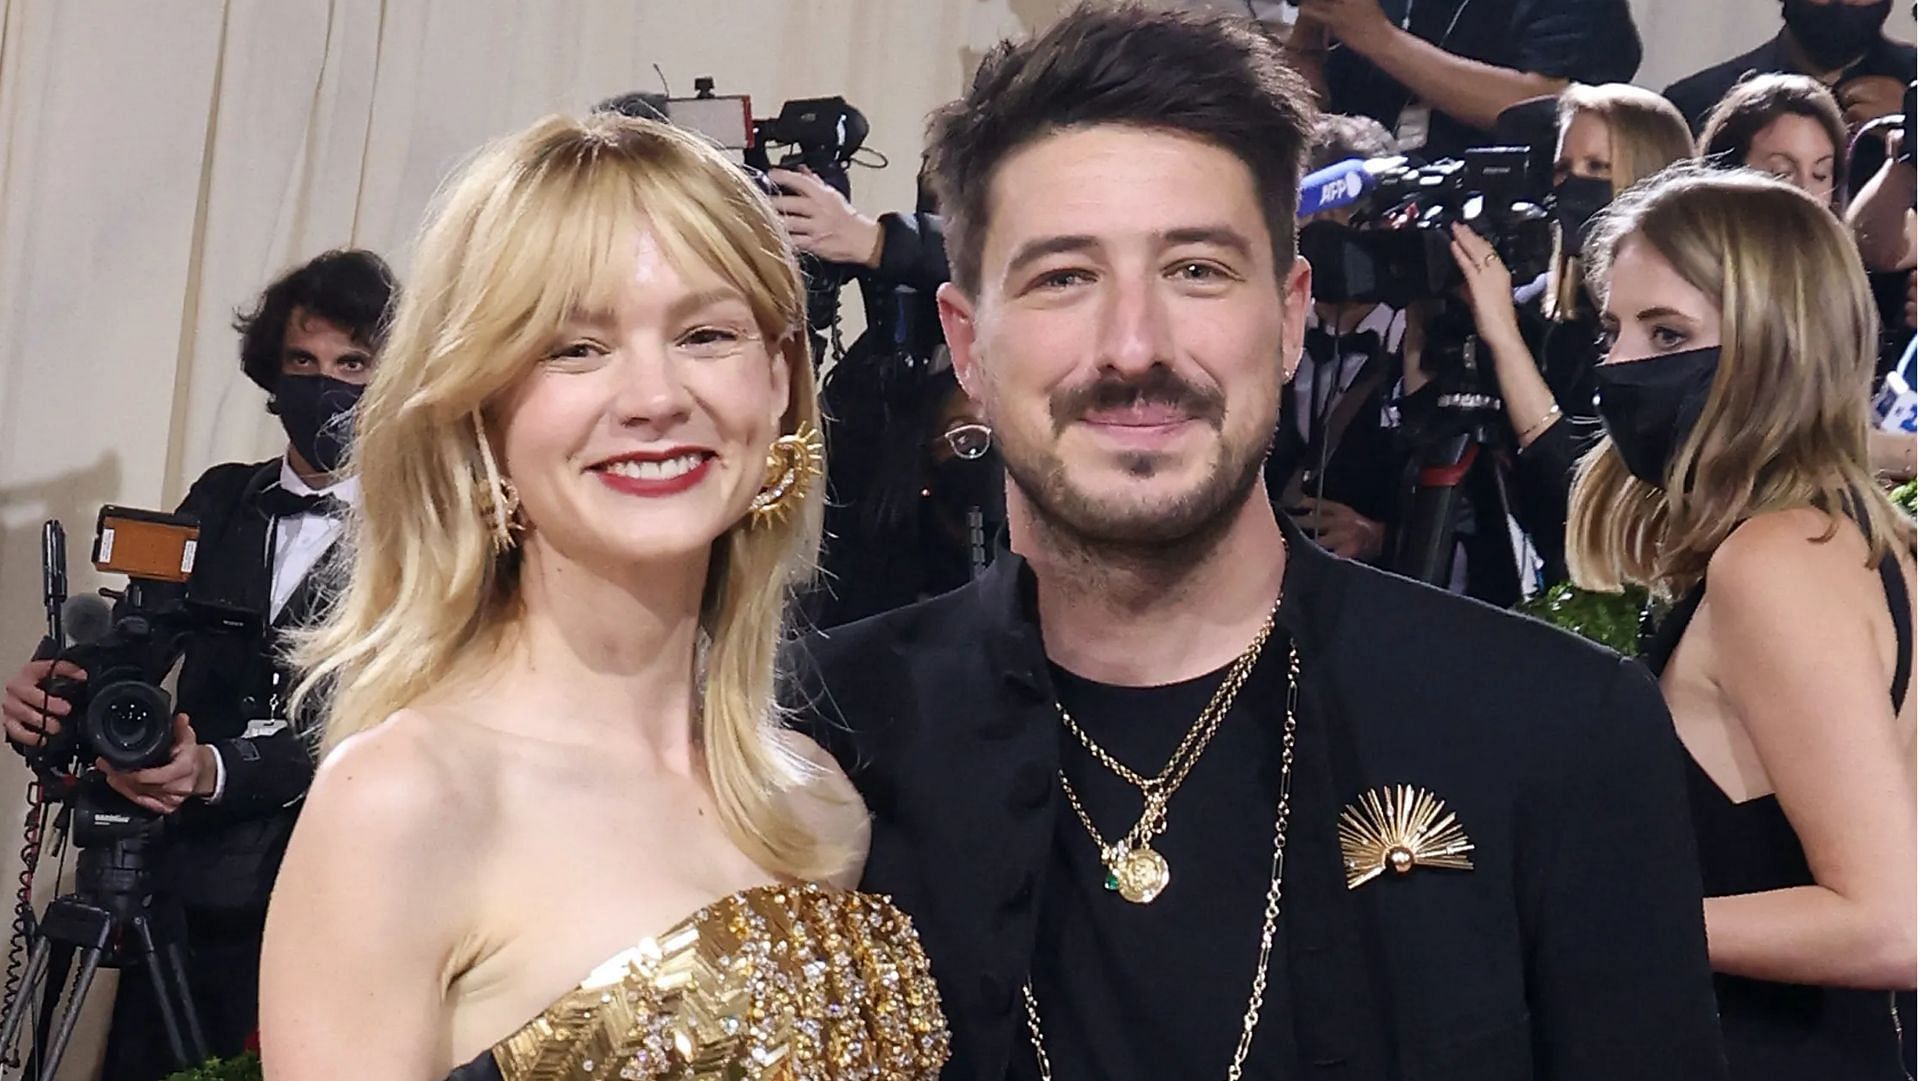 Carey Mulligan and Marcus Mumford met at a youth camp. (Photo via Taylor Hill/Getty Images)